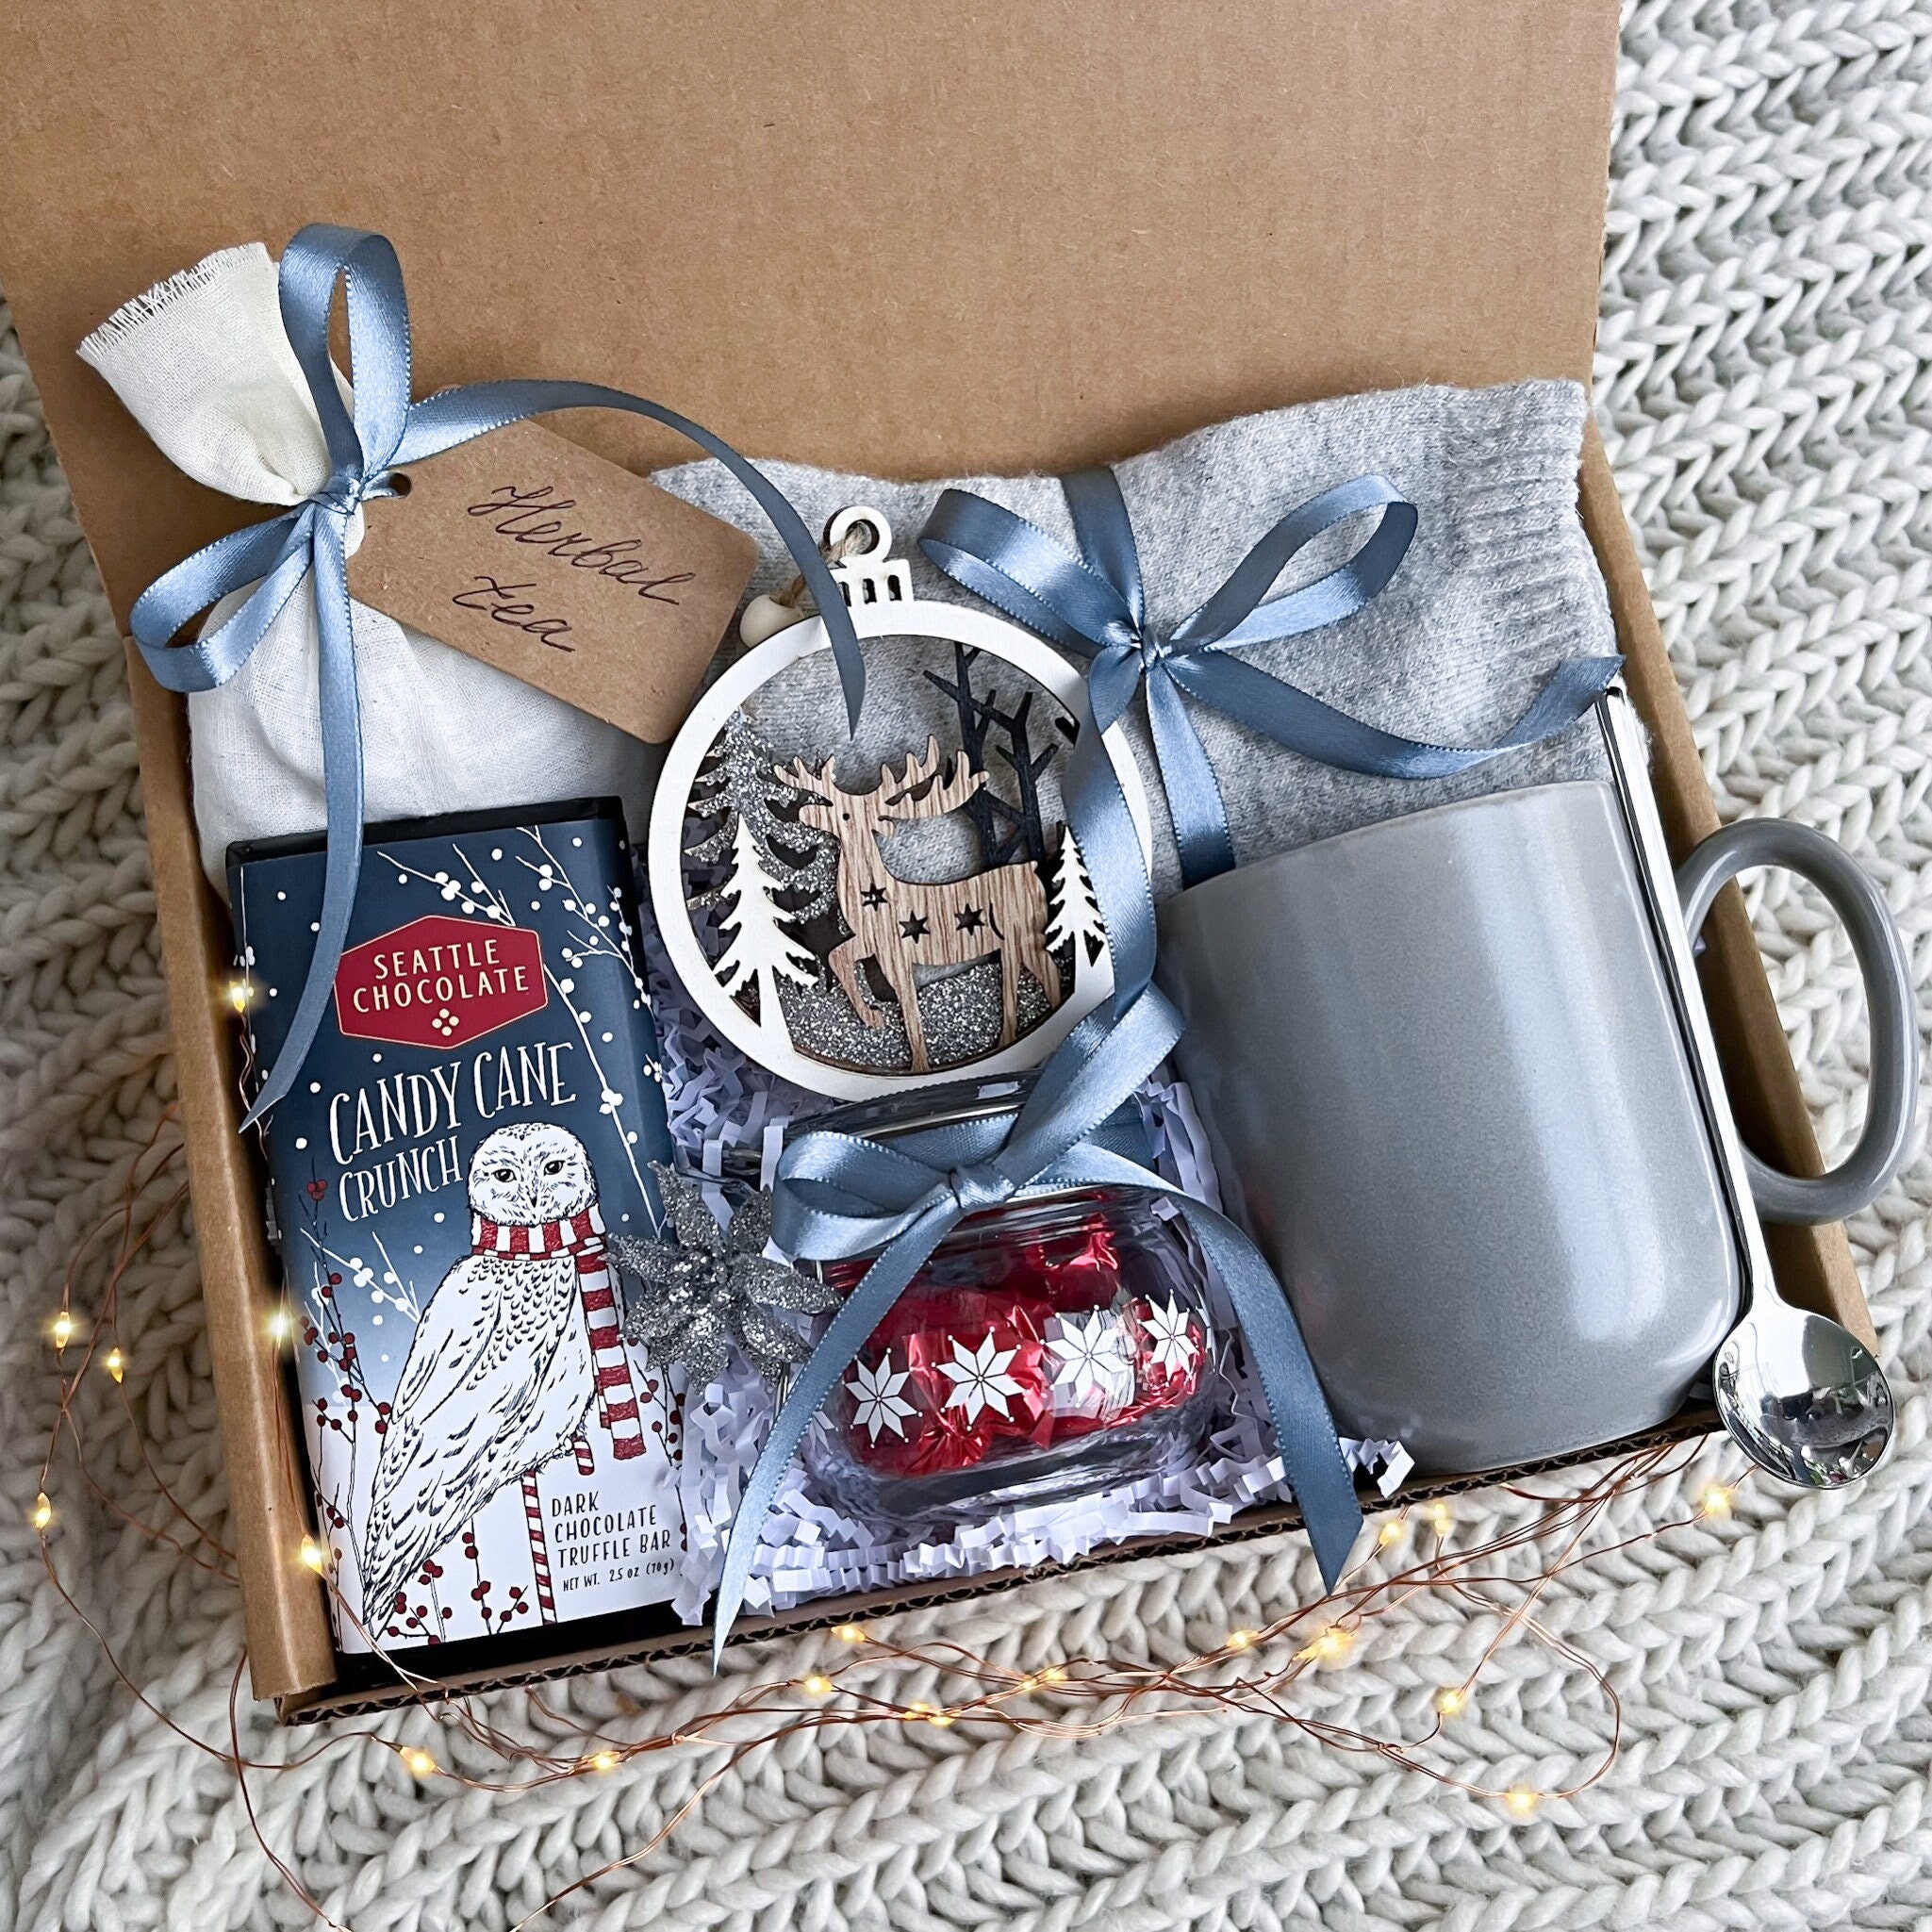 Gift Ideas for the Baker - The Gracious Wife